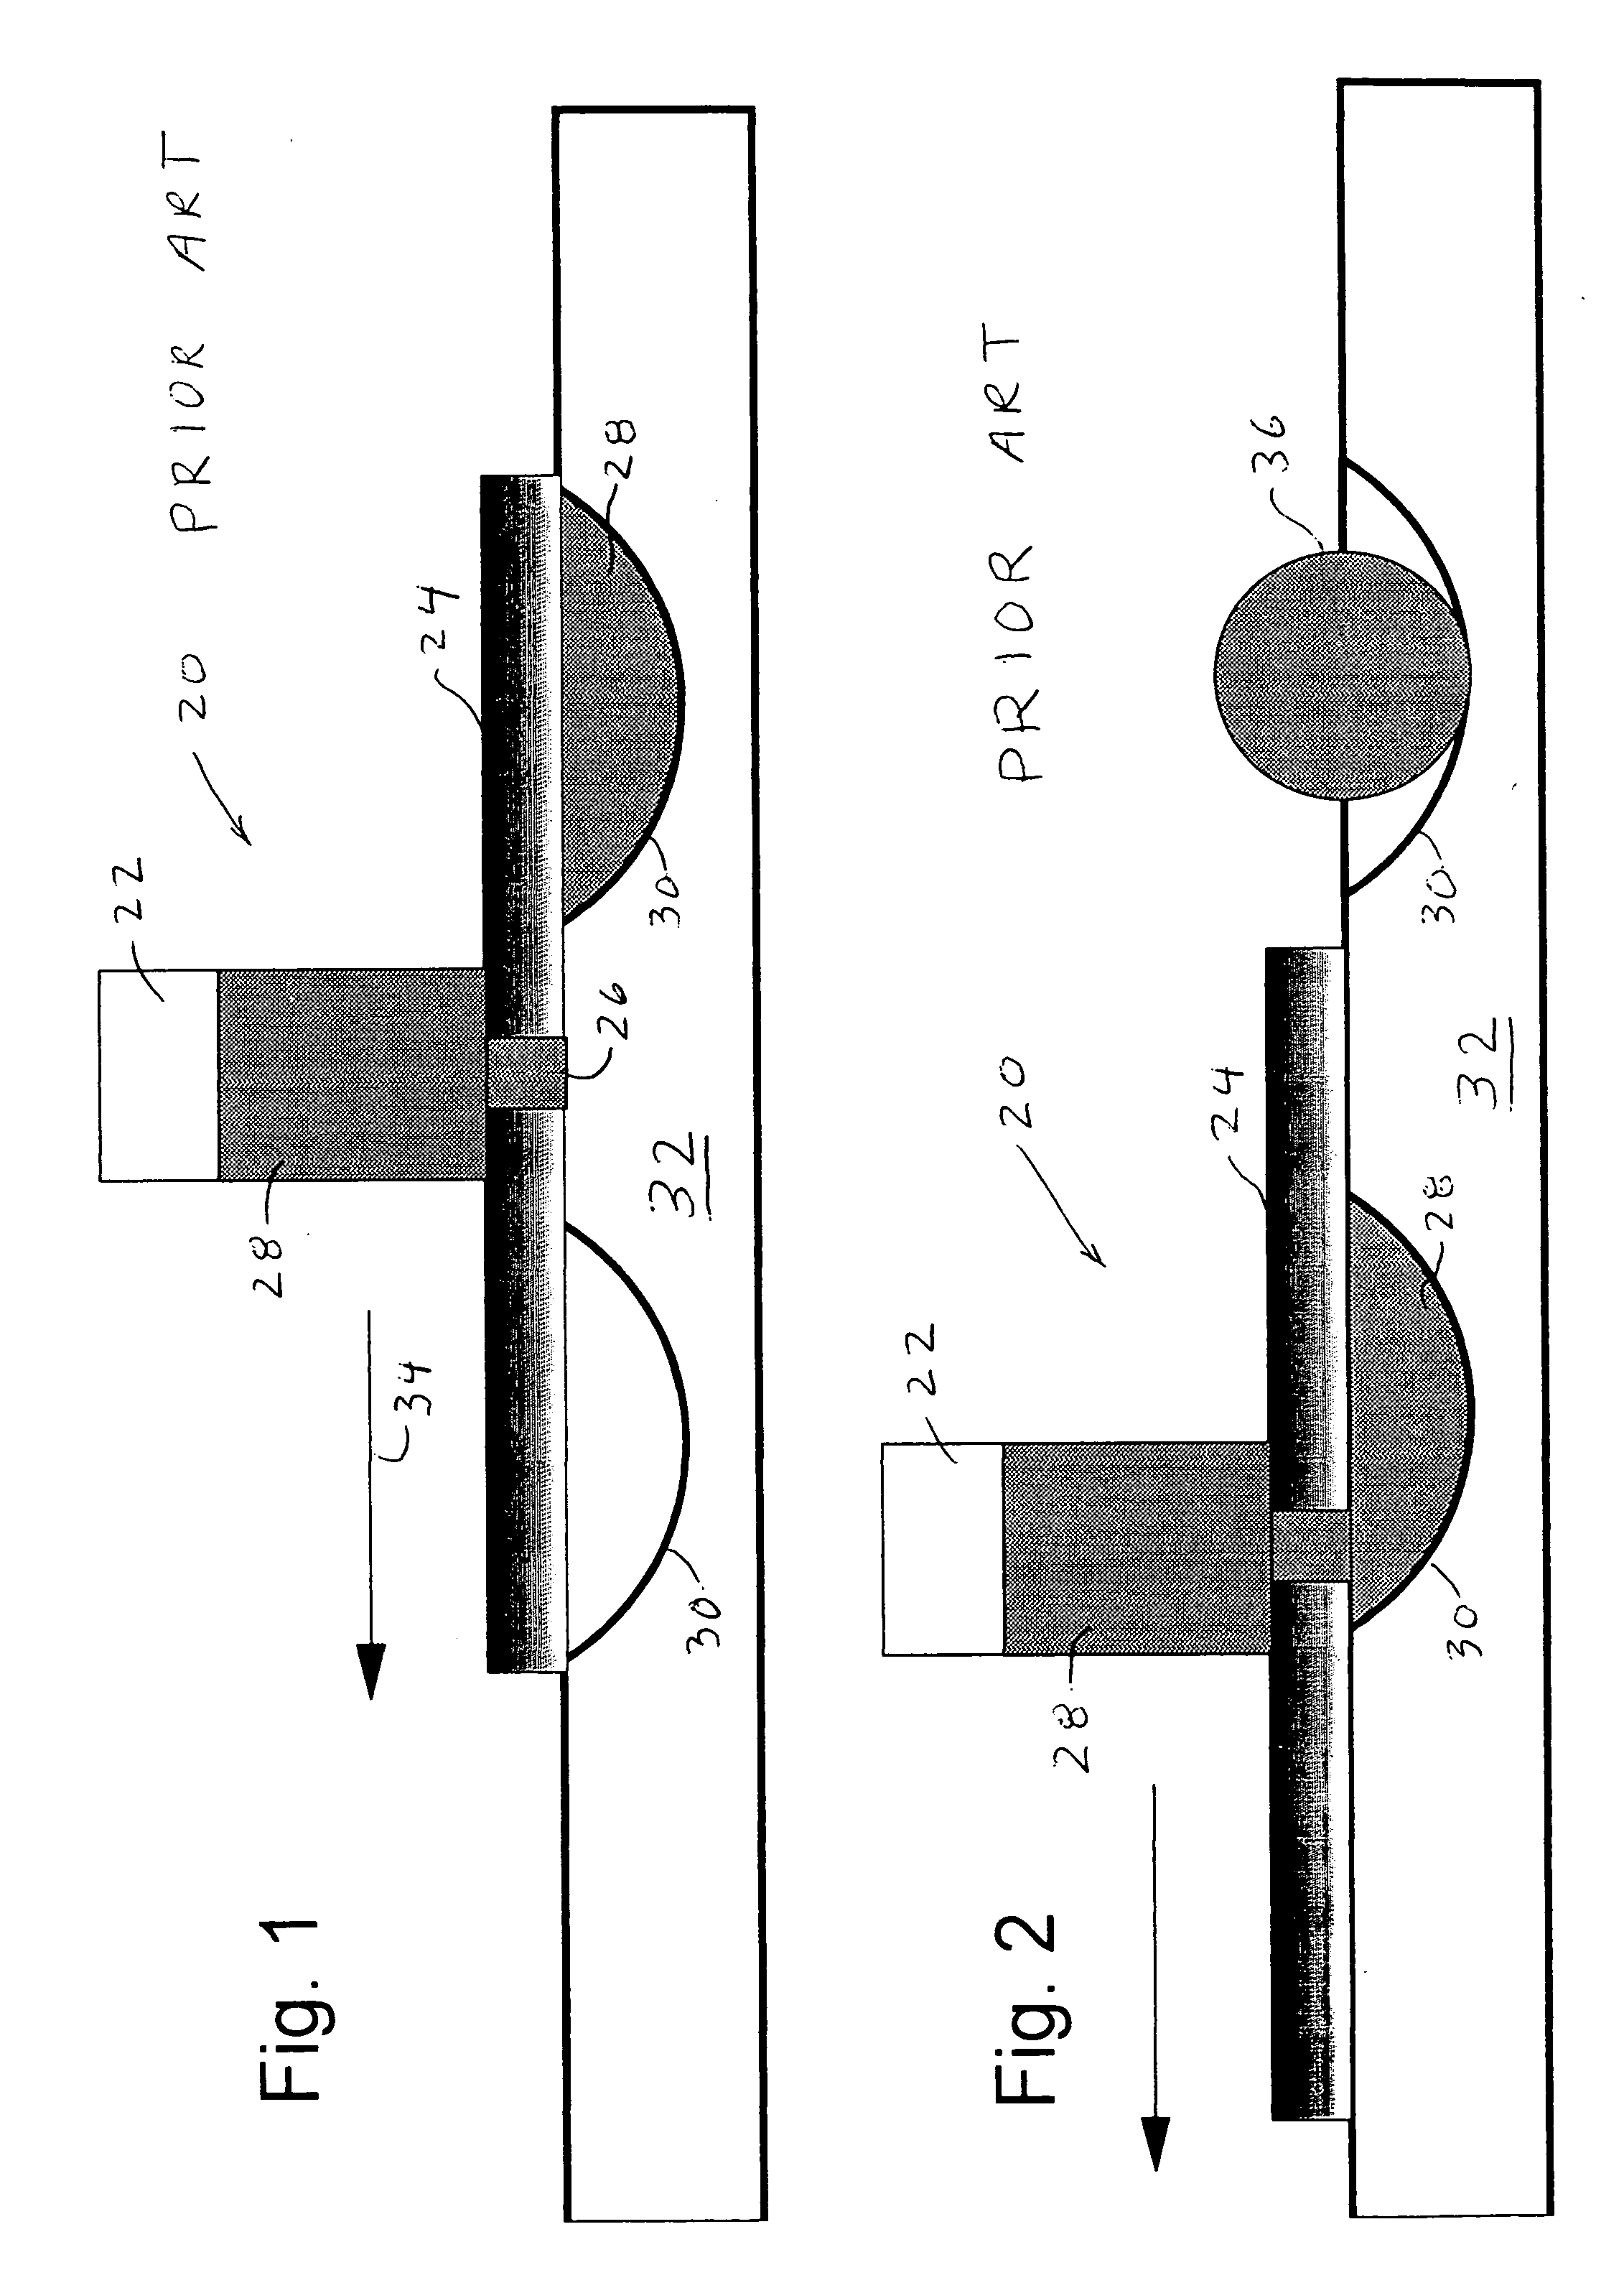 Injection molded continuously solidified solder method and apparatus